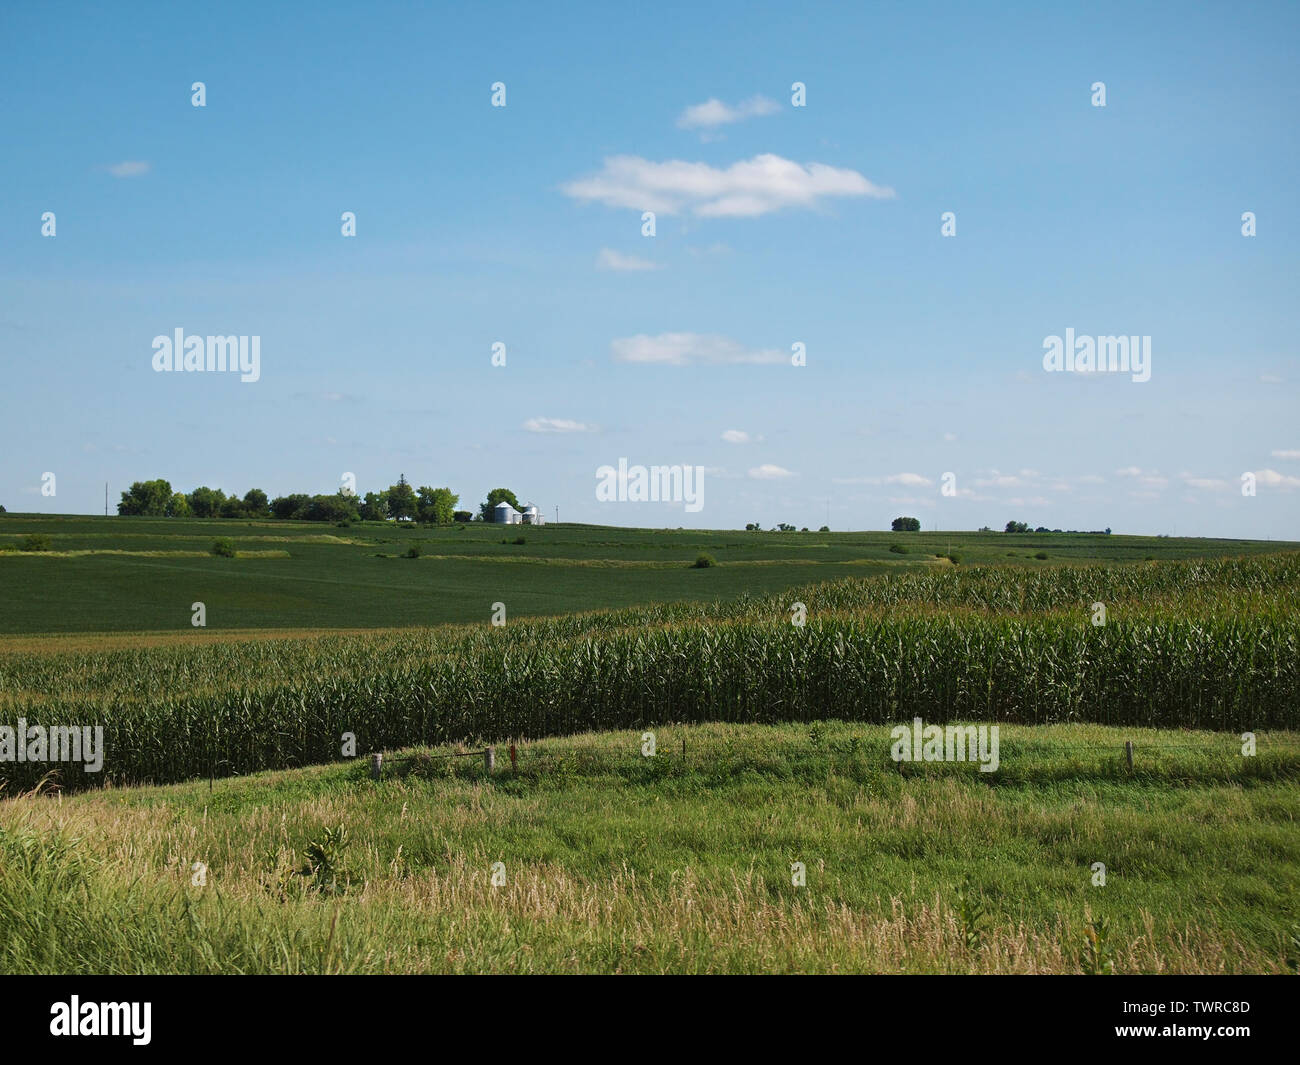 A classic Iowa landscape of rolling hills planted with vibrant green corn crops growing tall in midsummer under a bright blue sky. Stock Photo